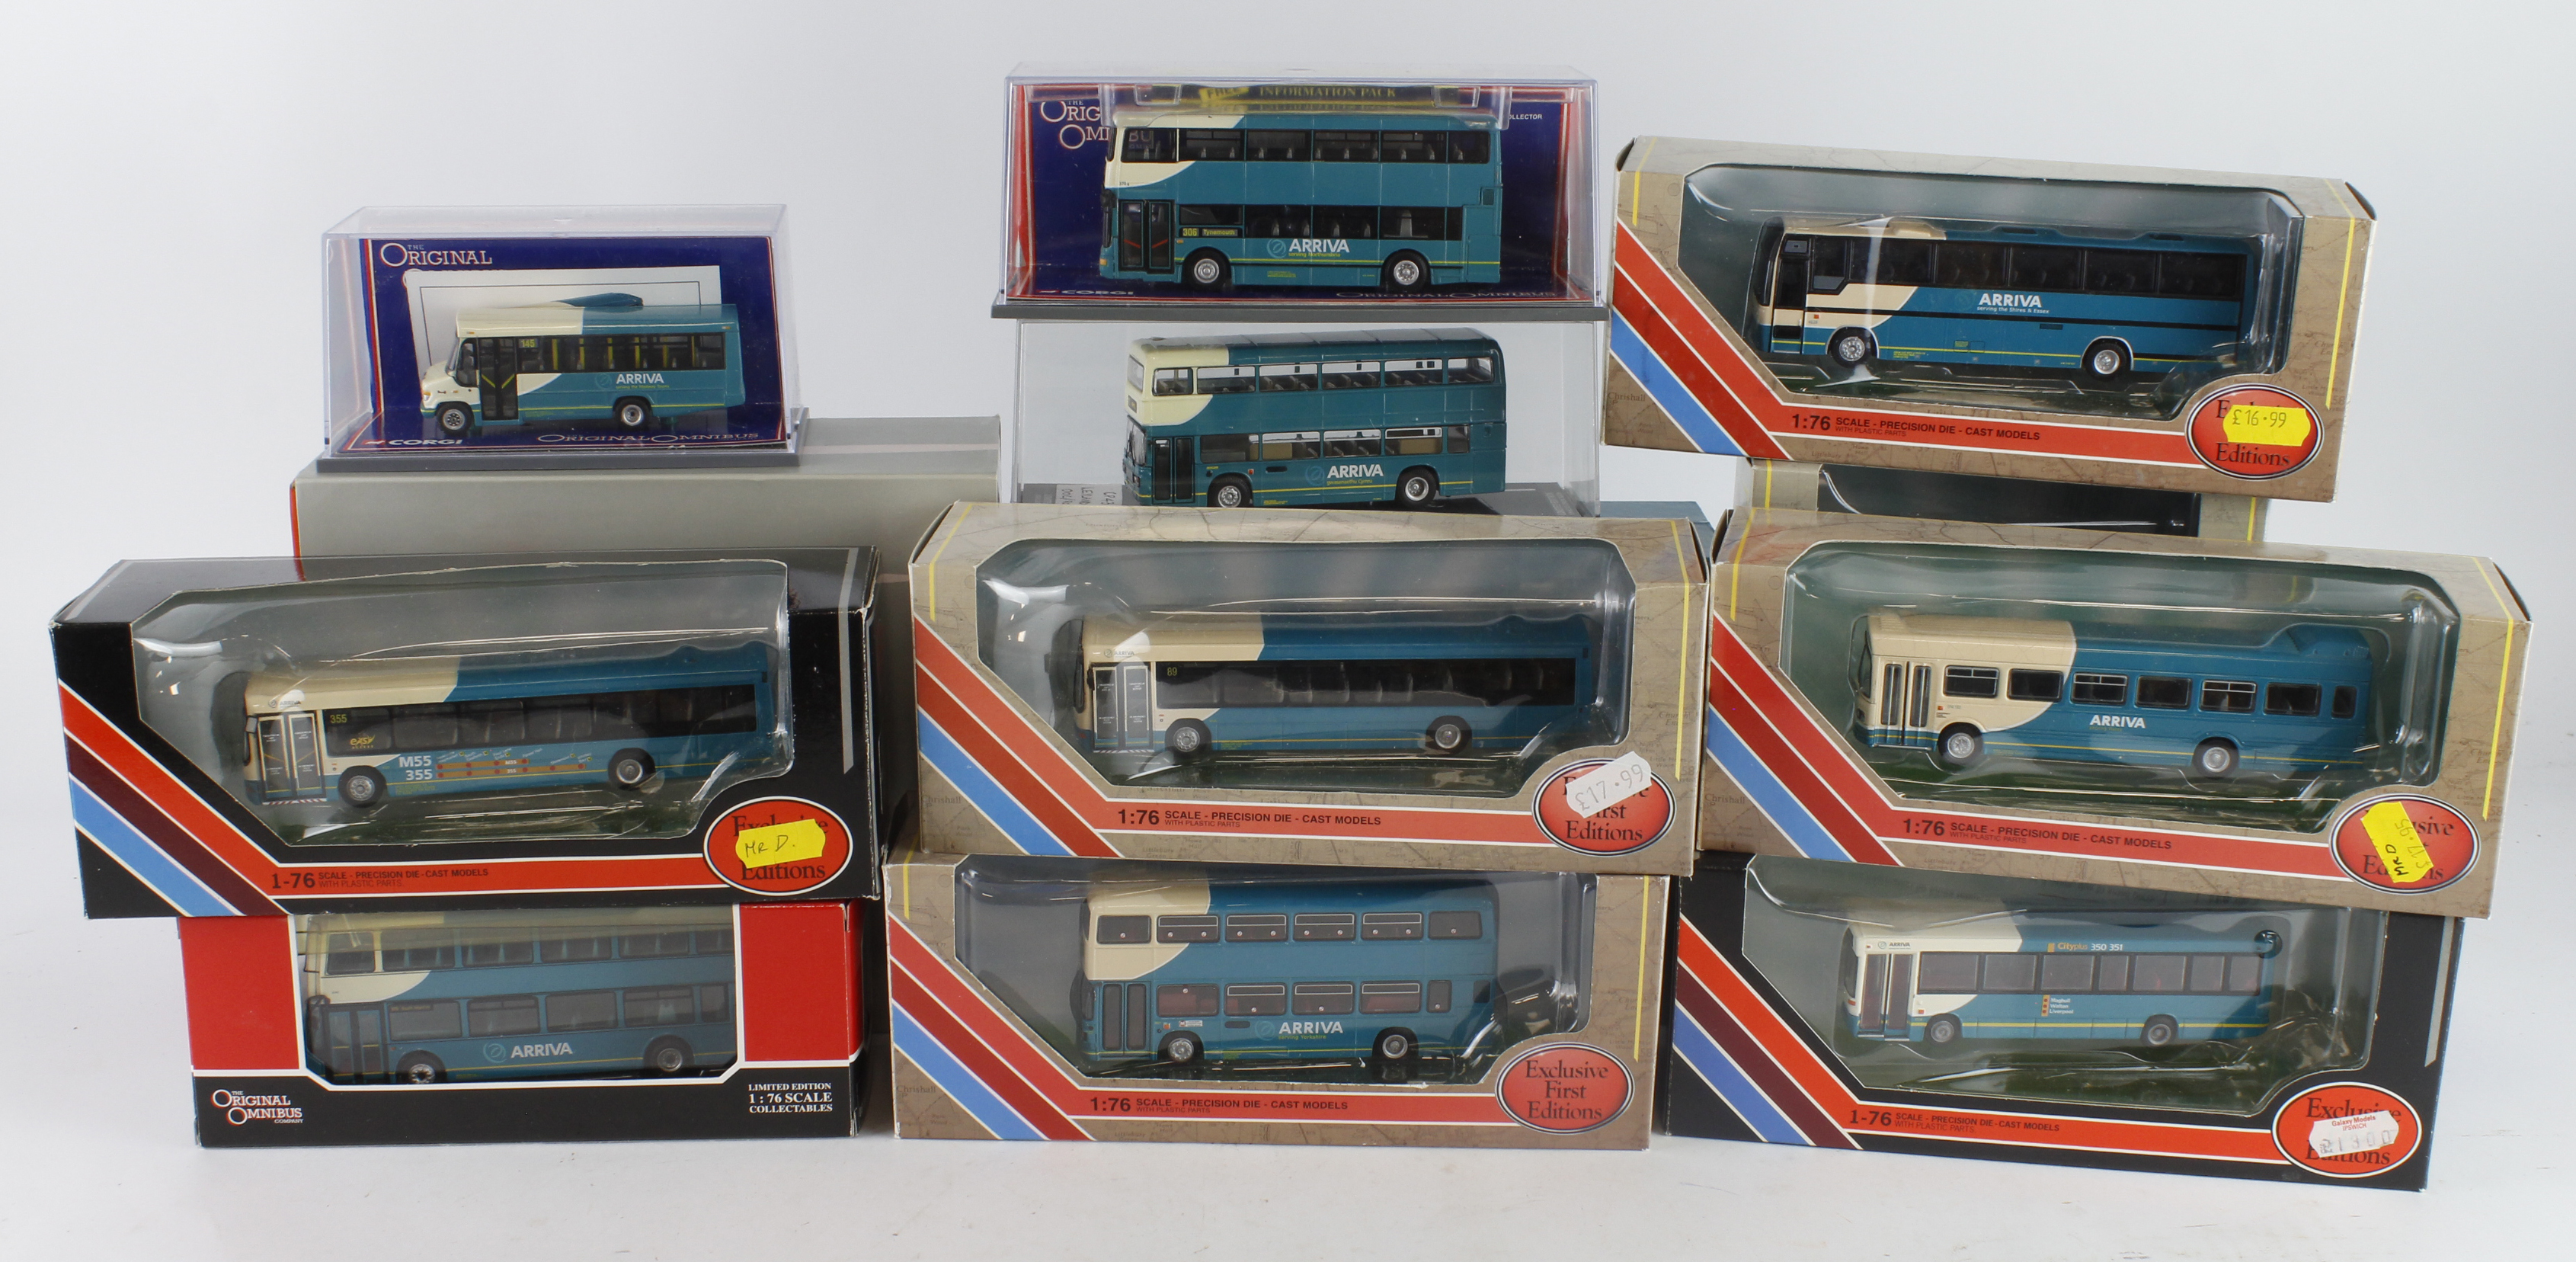 Arriva interest. Fourteen boxed Arriva livery model buses, makers include Creative Master,